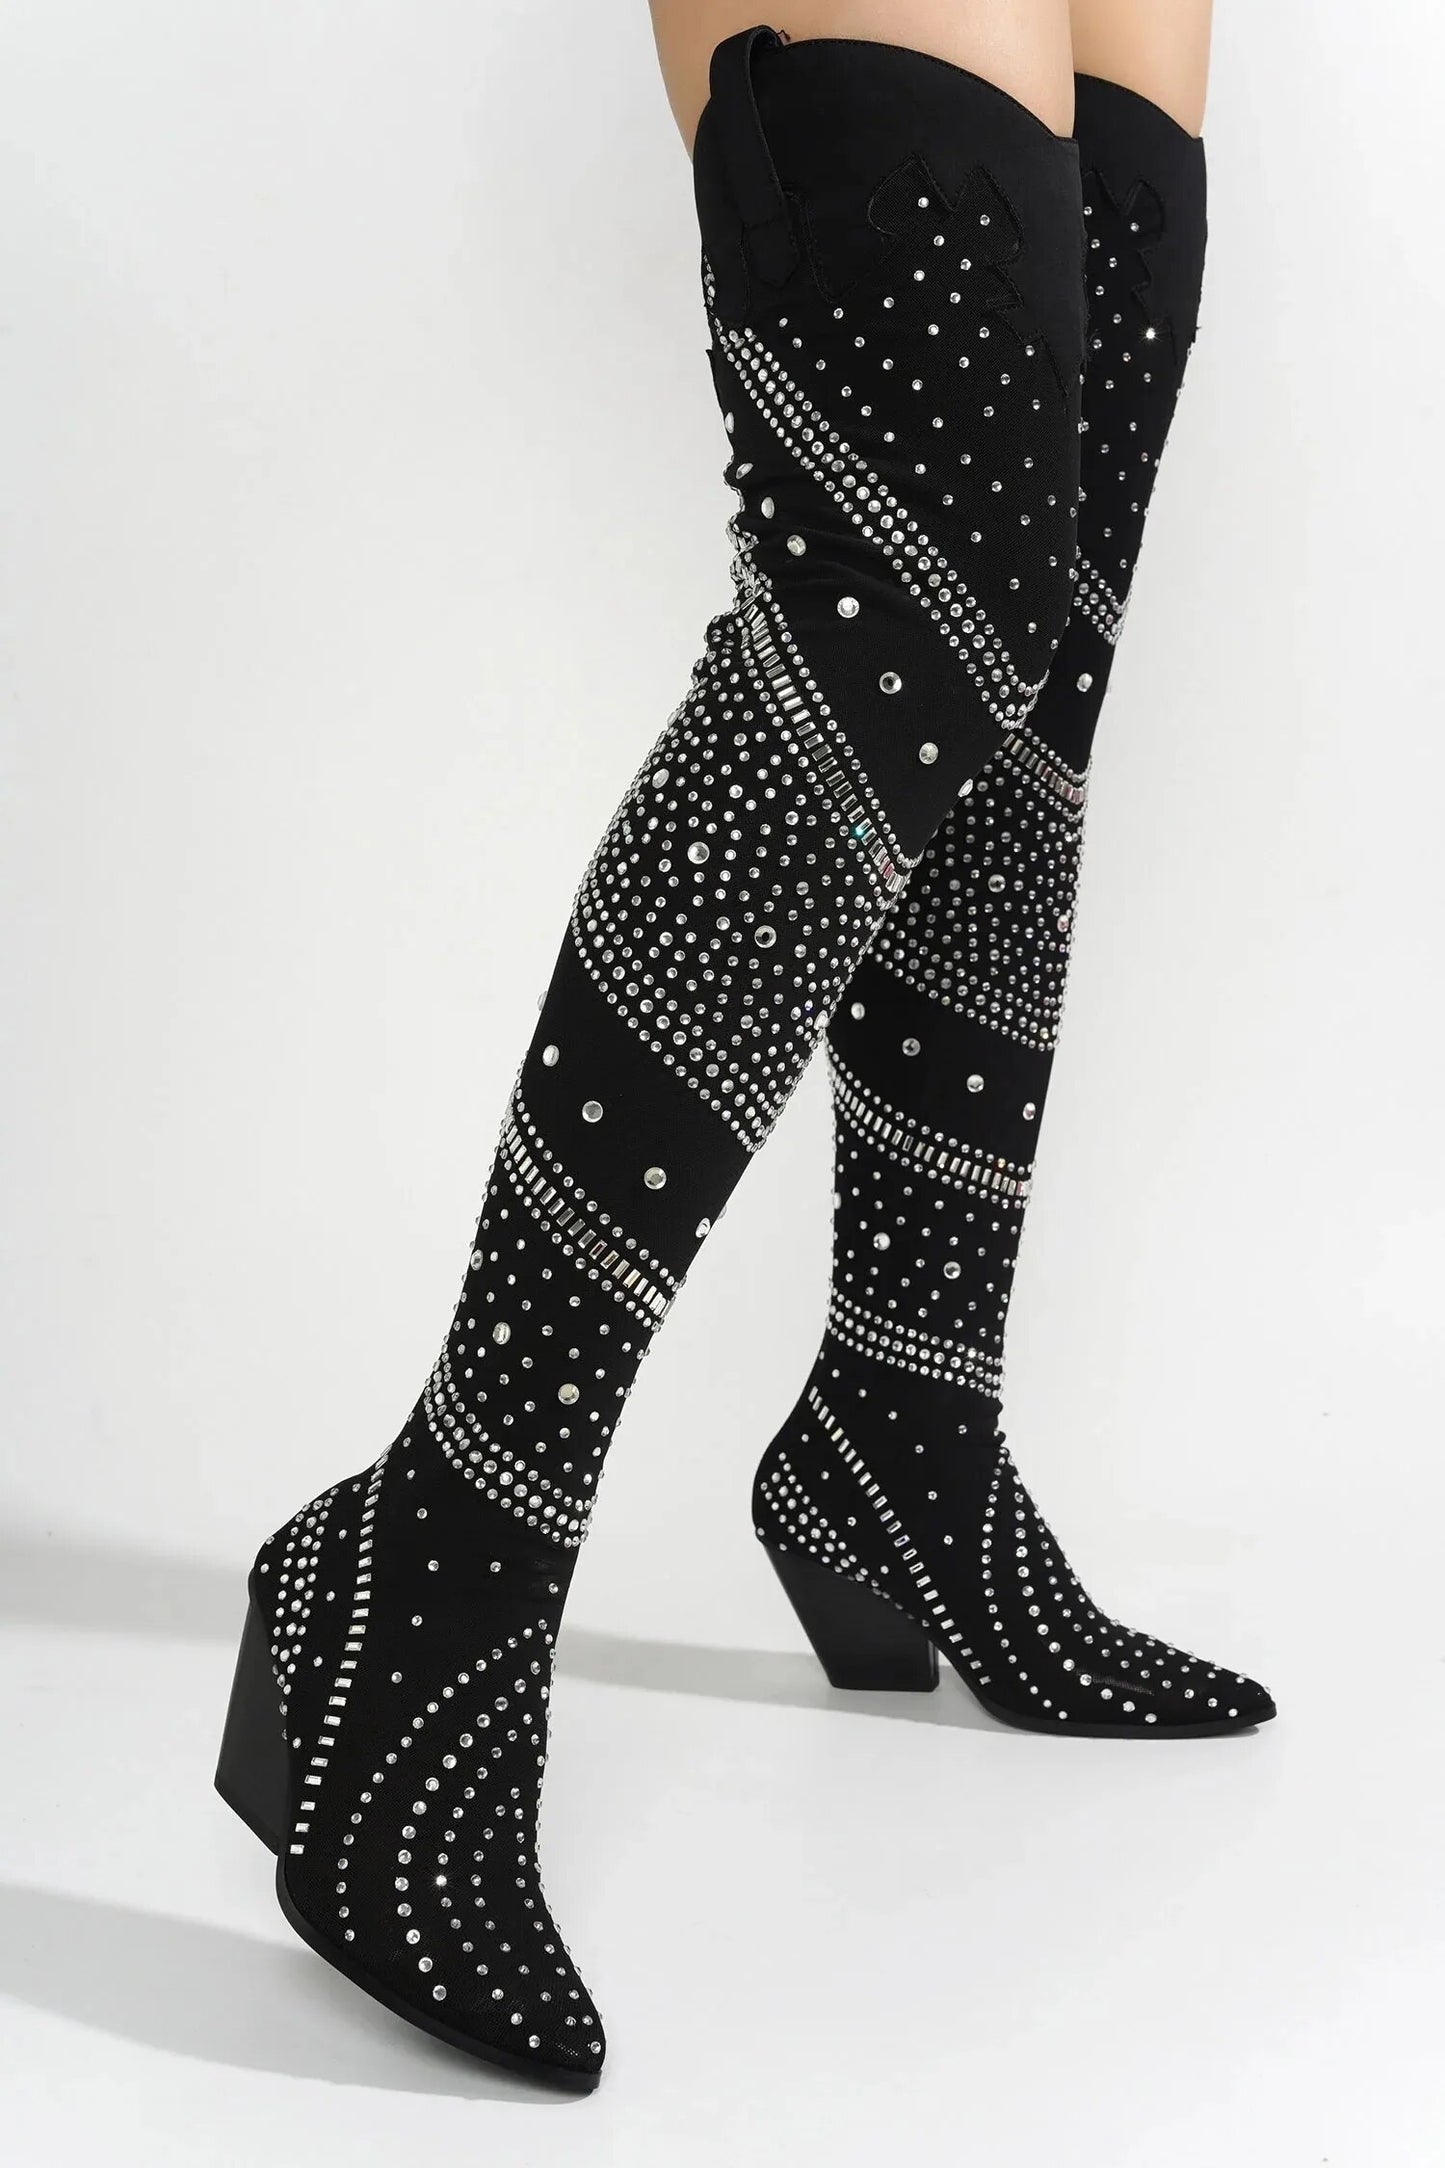 Luxury Crystal Bling Over-The-Knee Women's Boots